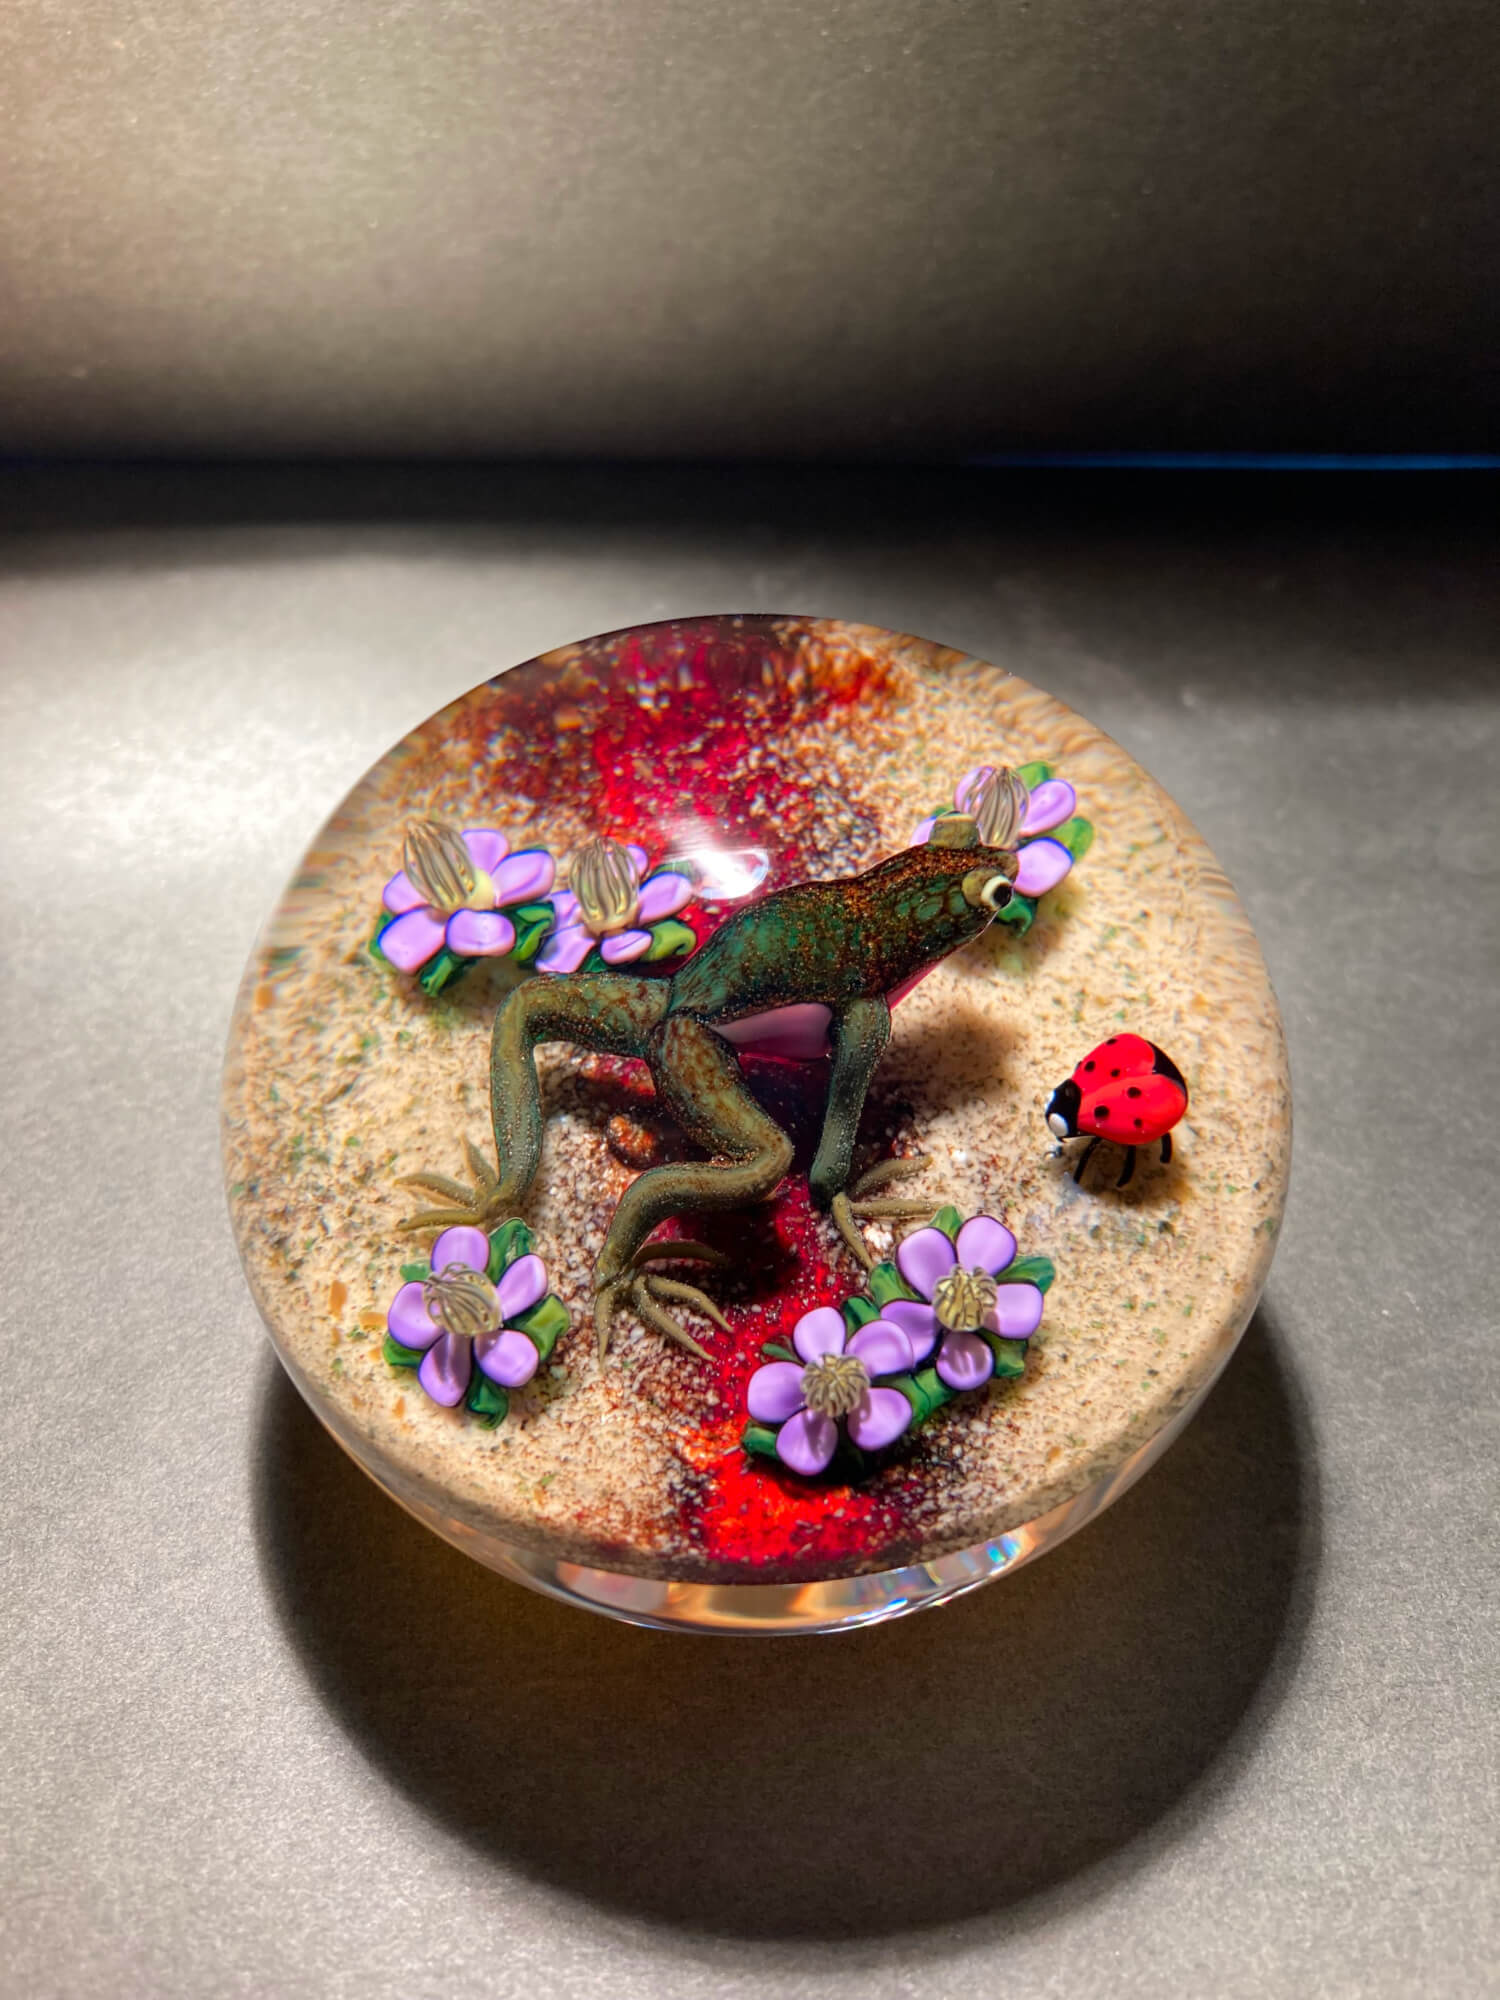 Frog and Ladybug glass paperweight by Ken Rosenfeld